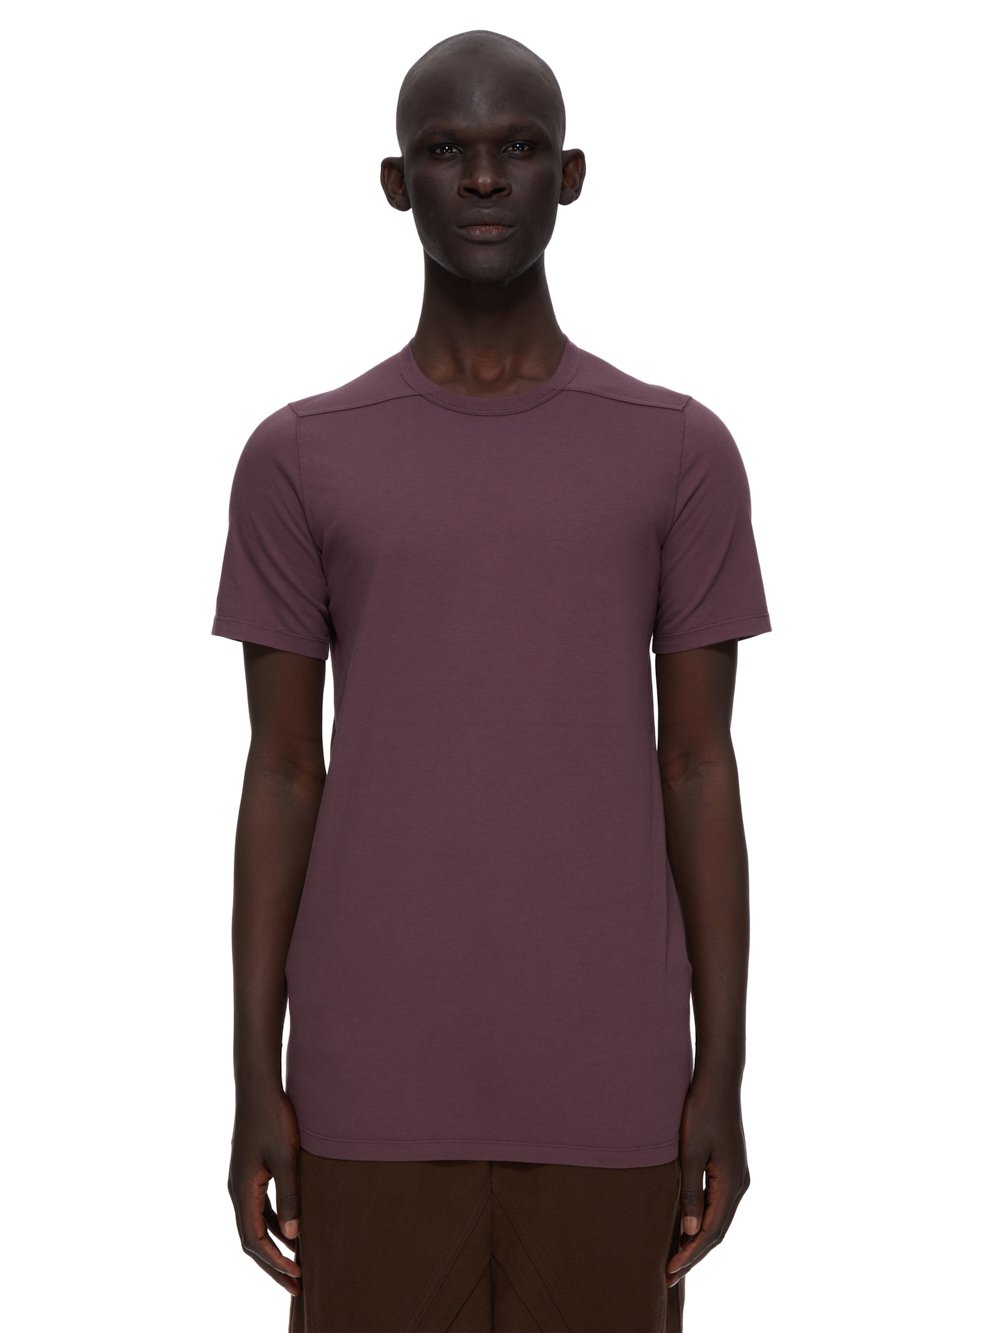 RICK OWENS FW23 LUXOR LEVEL T IN AMETHYST PURPLE CLASSIC COTTON JERSEY